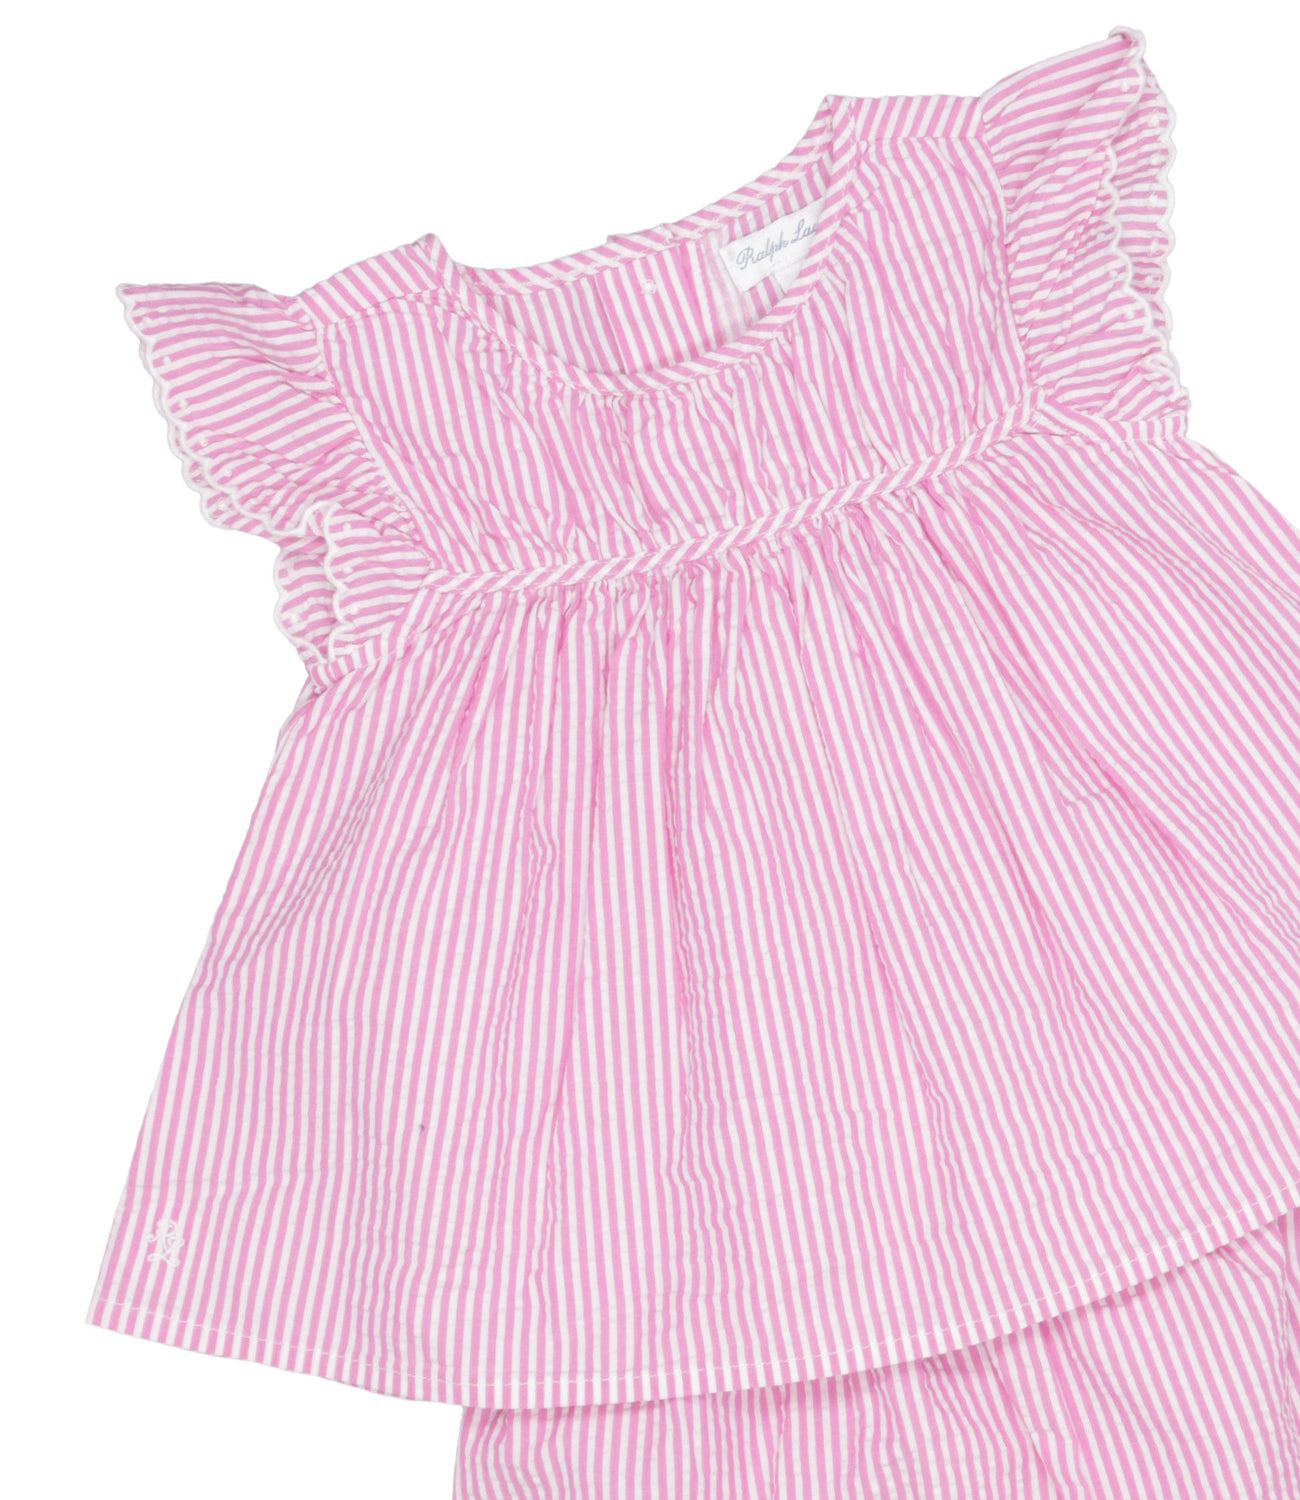 Ralph Lauren Childrenswear | Pink and White Top and Shorts Set